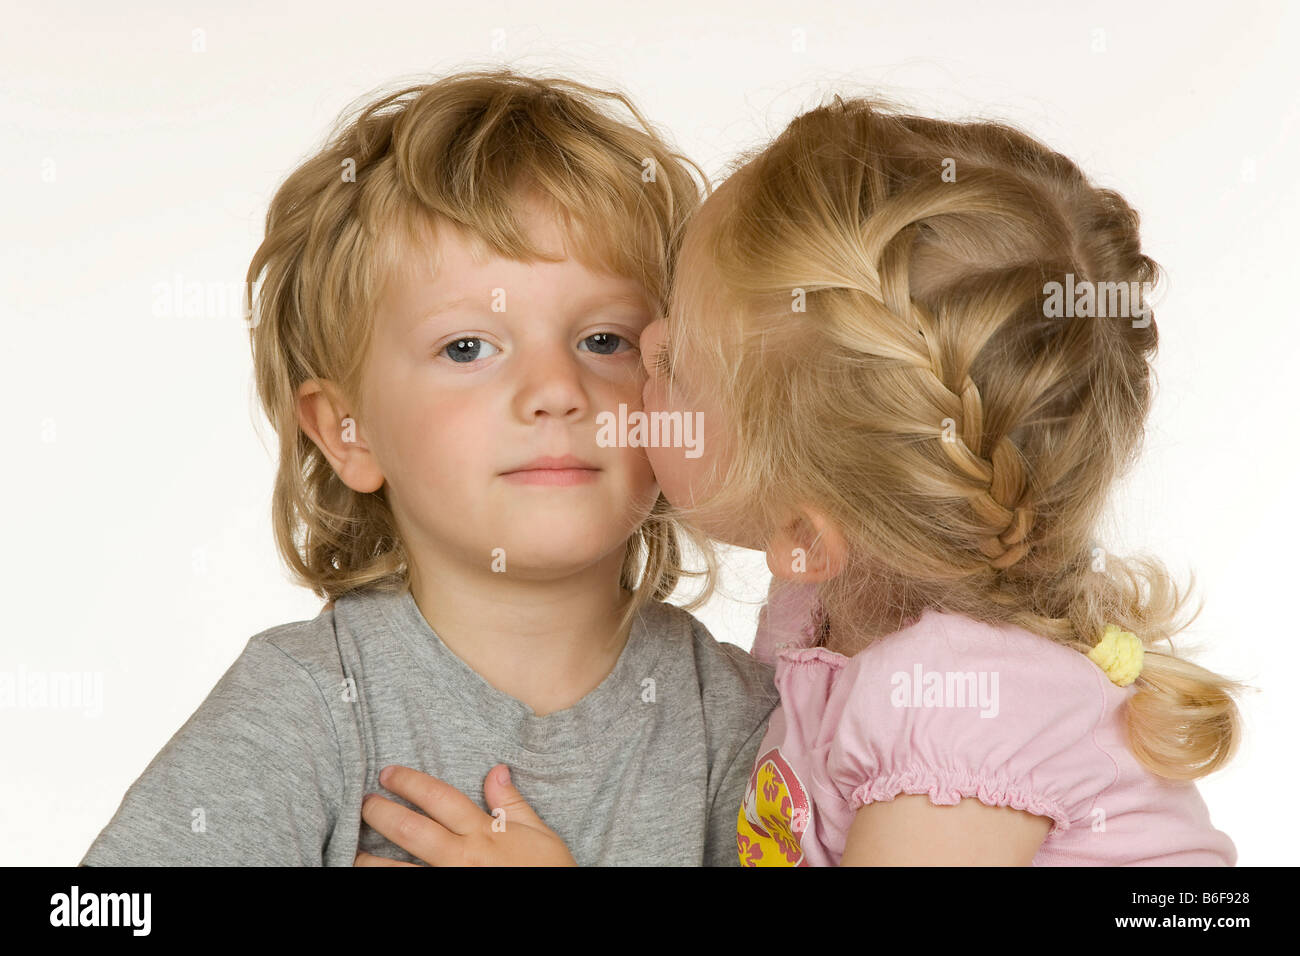 Girl, two years old, kisses boy, three years old, on the cheek Stock Photo